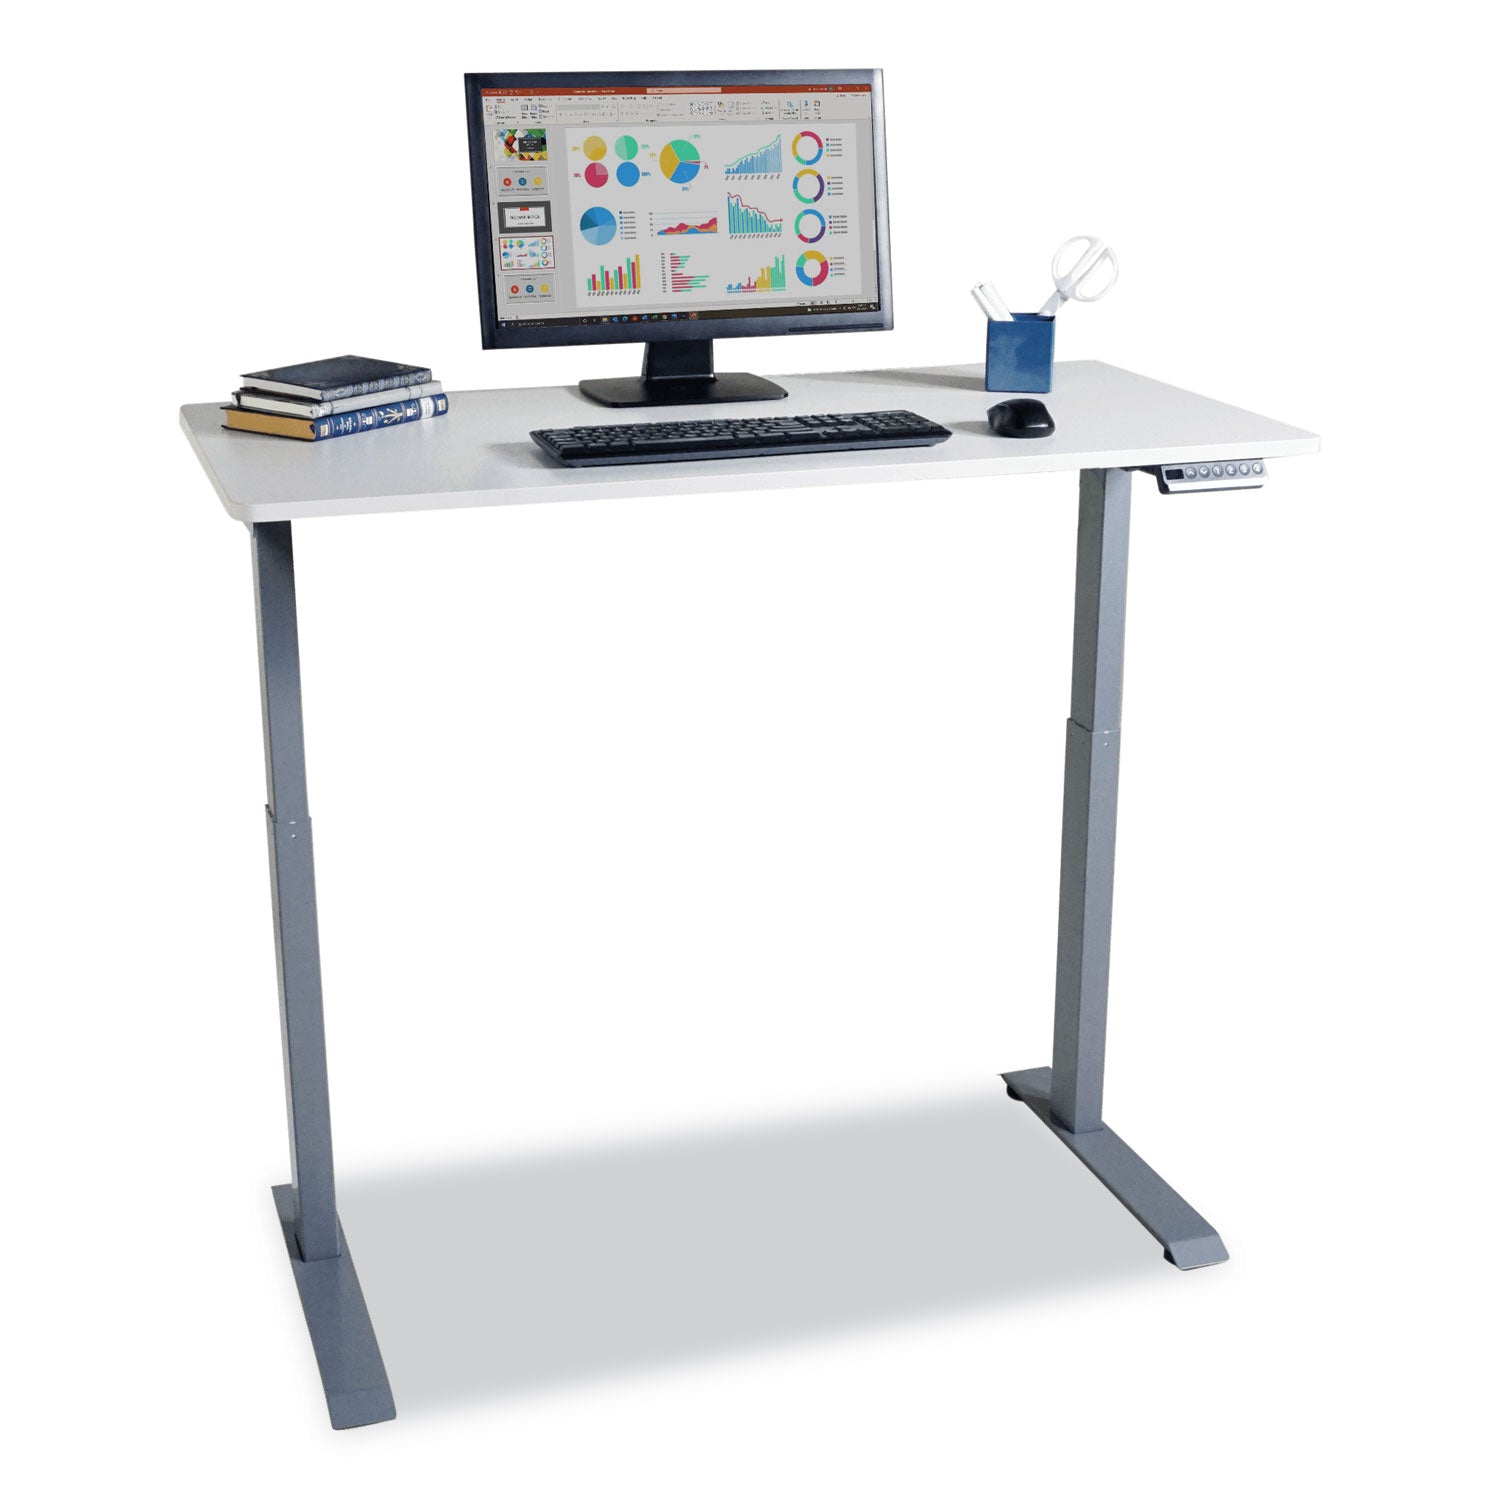 electric-height-adjustable-standing-desk-48-x-236-x-287-to-484-white-ships-in-1-3-business-days_vctdc840w - 3